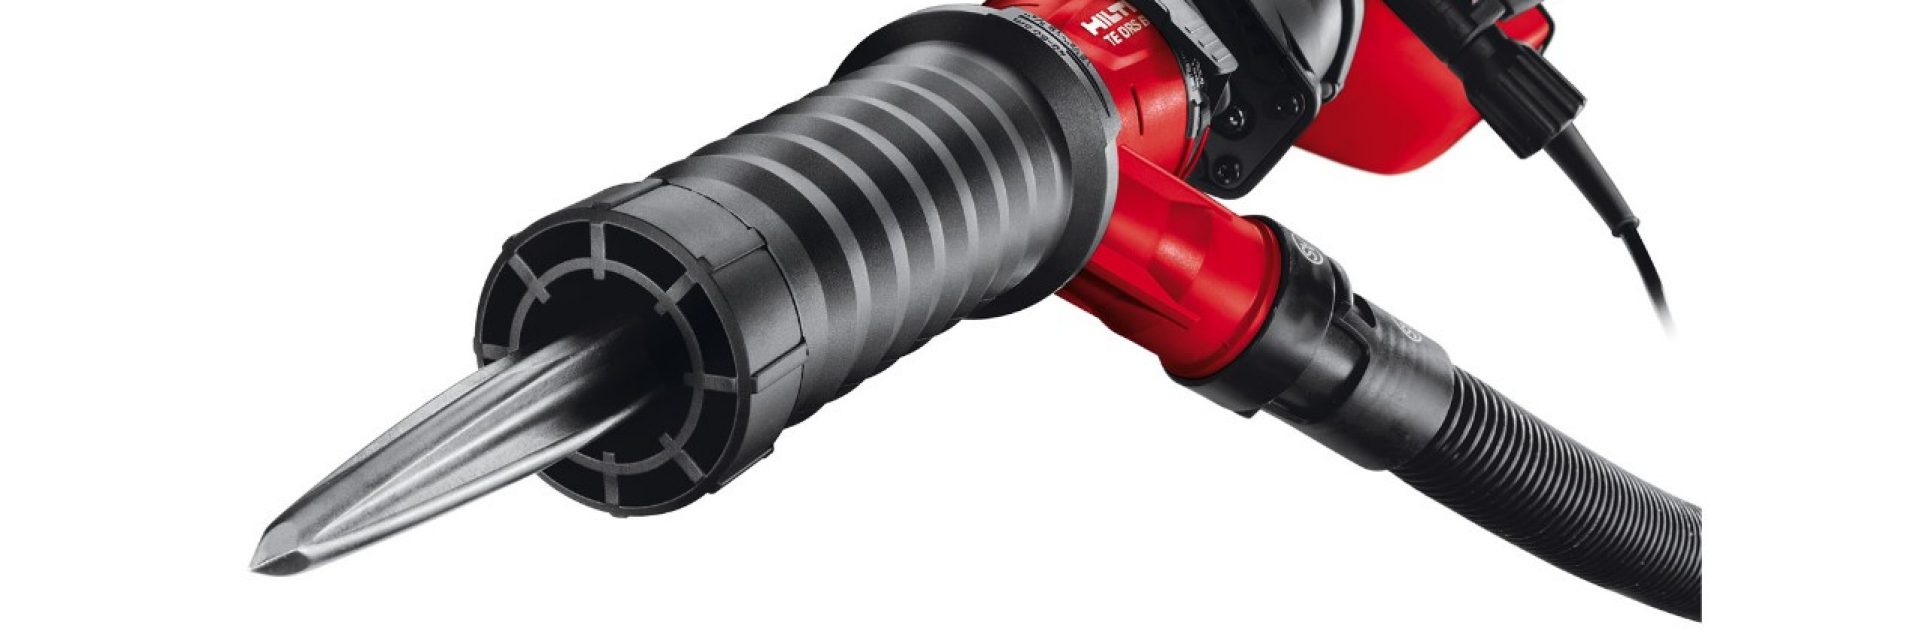 Hilti dust removal system for breakers